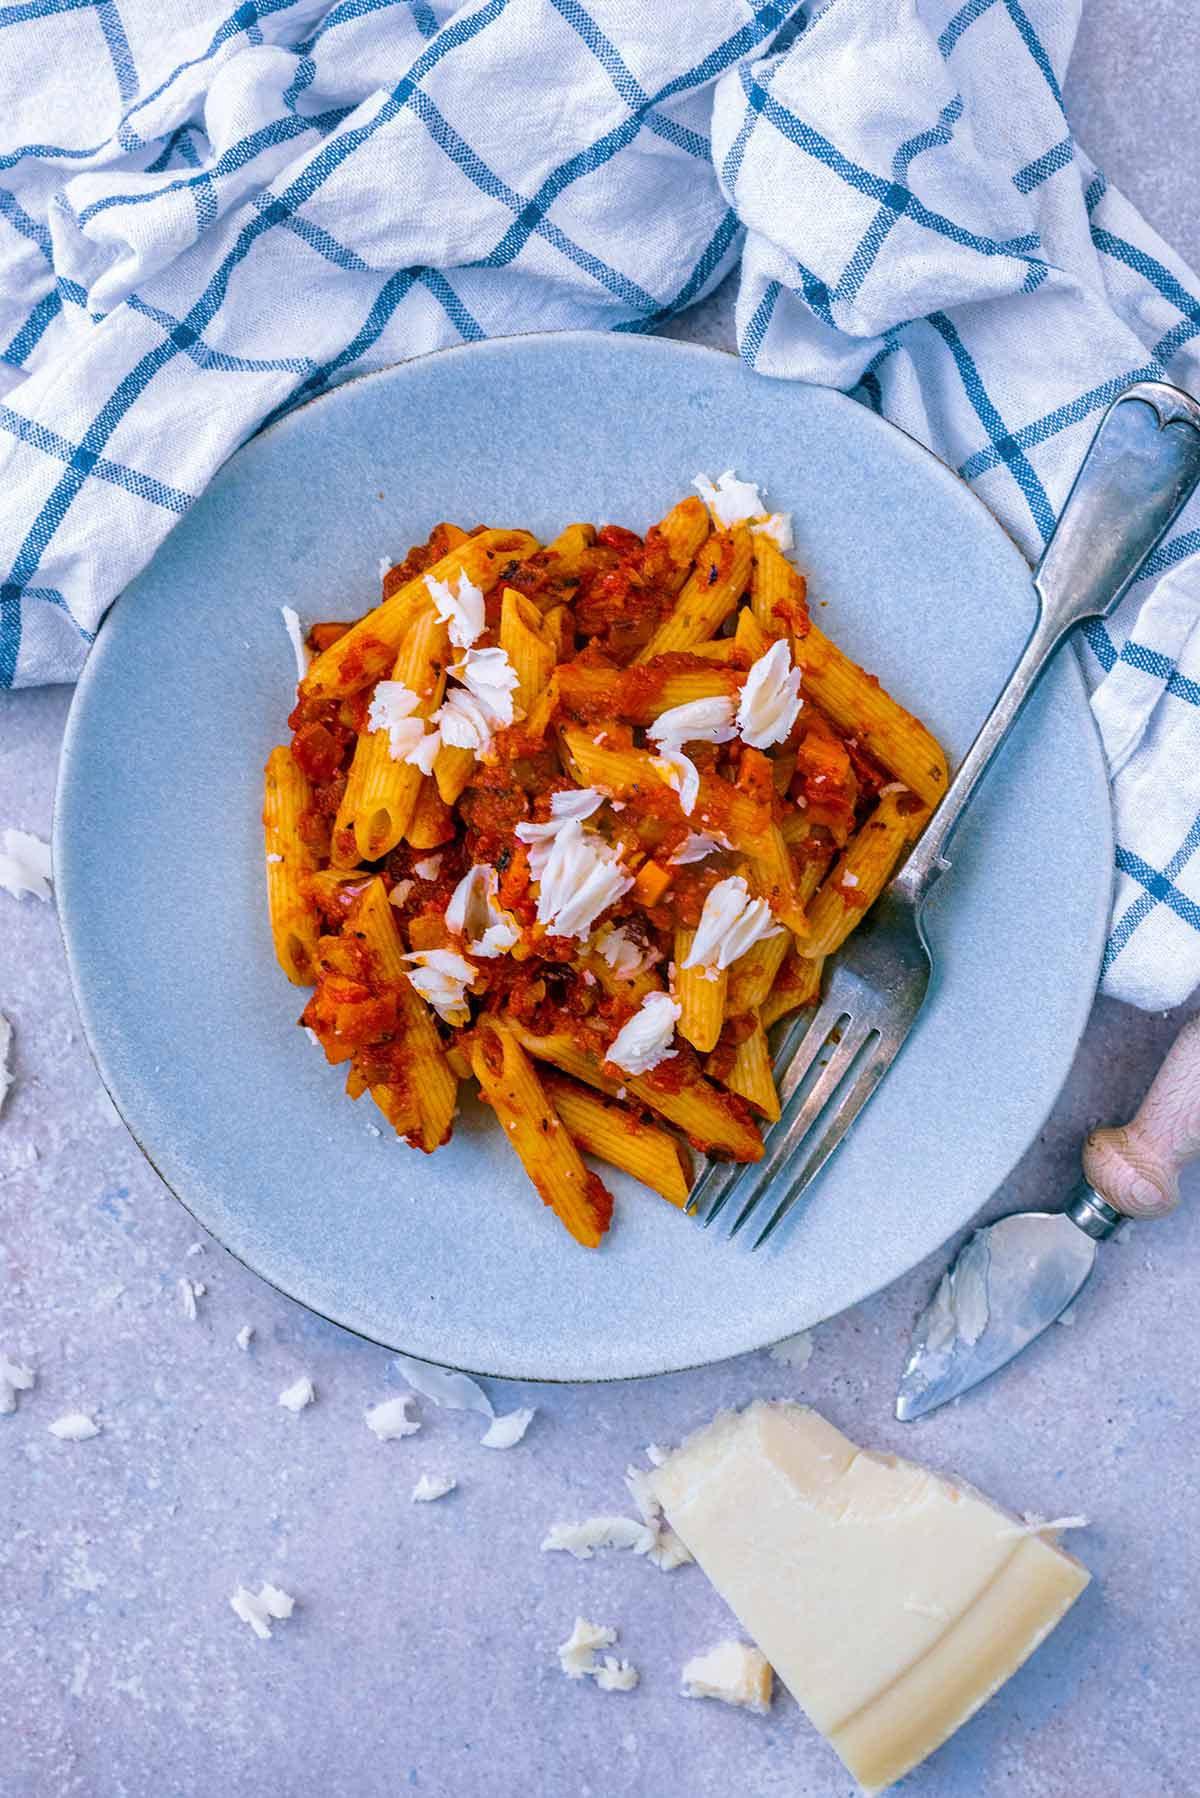 Penne pasta in a tomato sauce with Parmesan shavings on top.